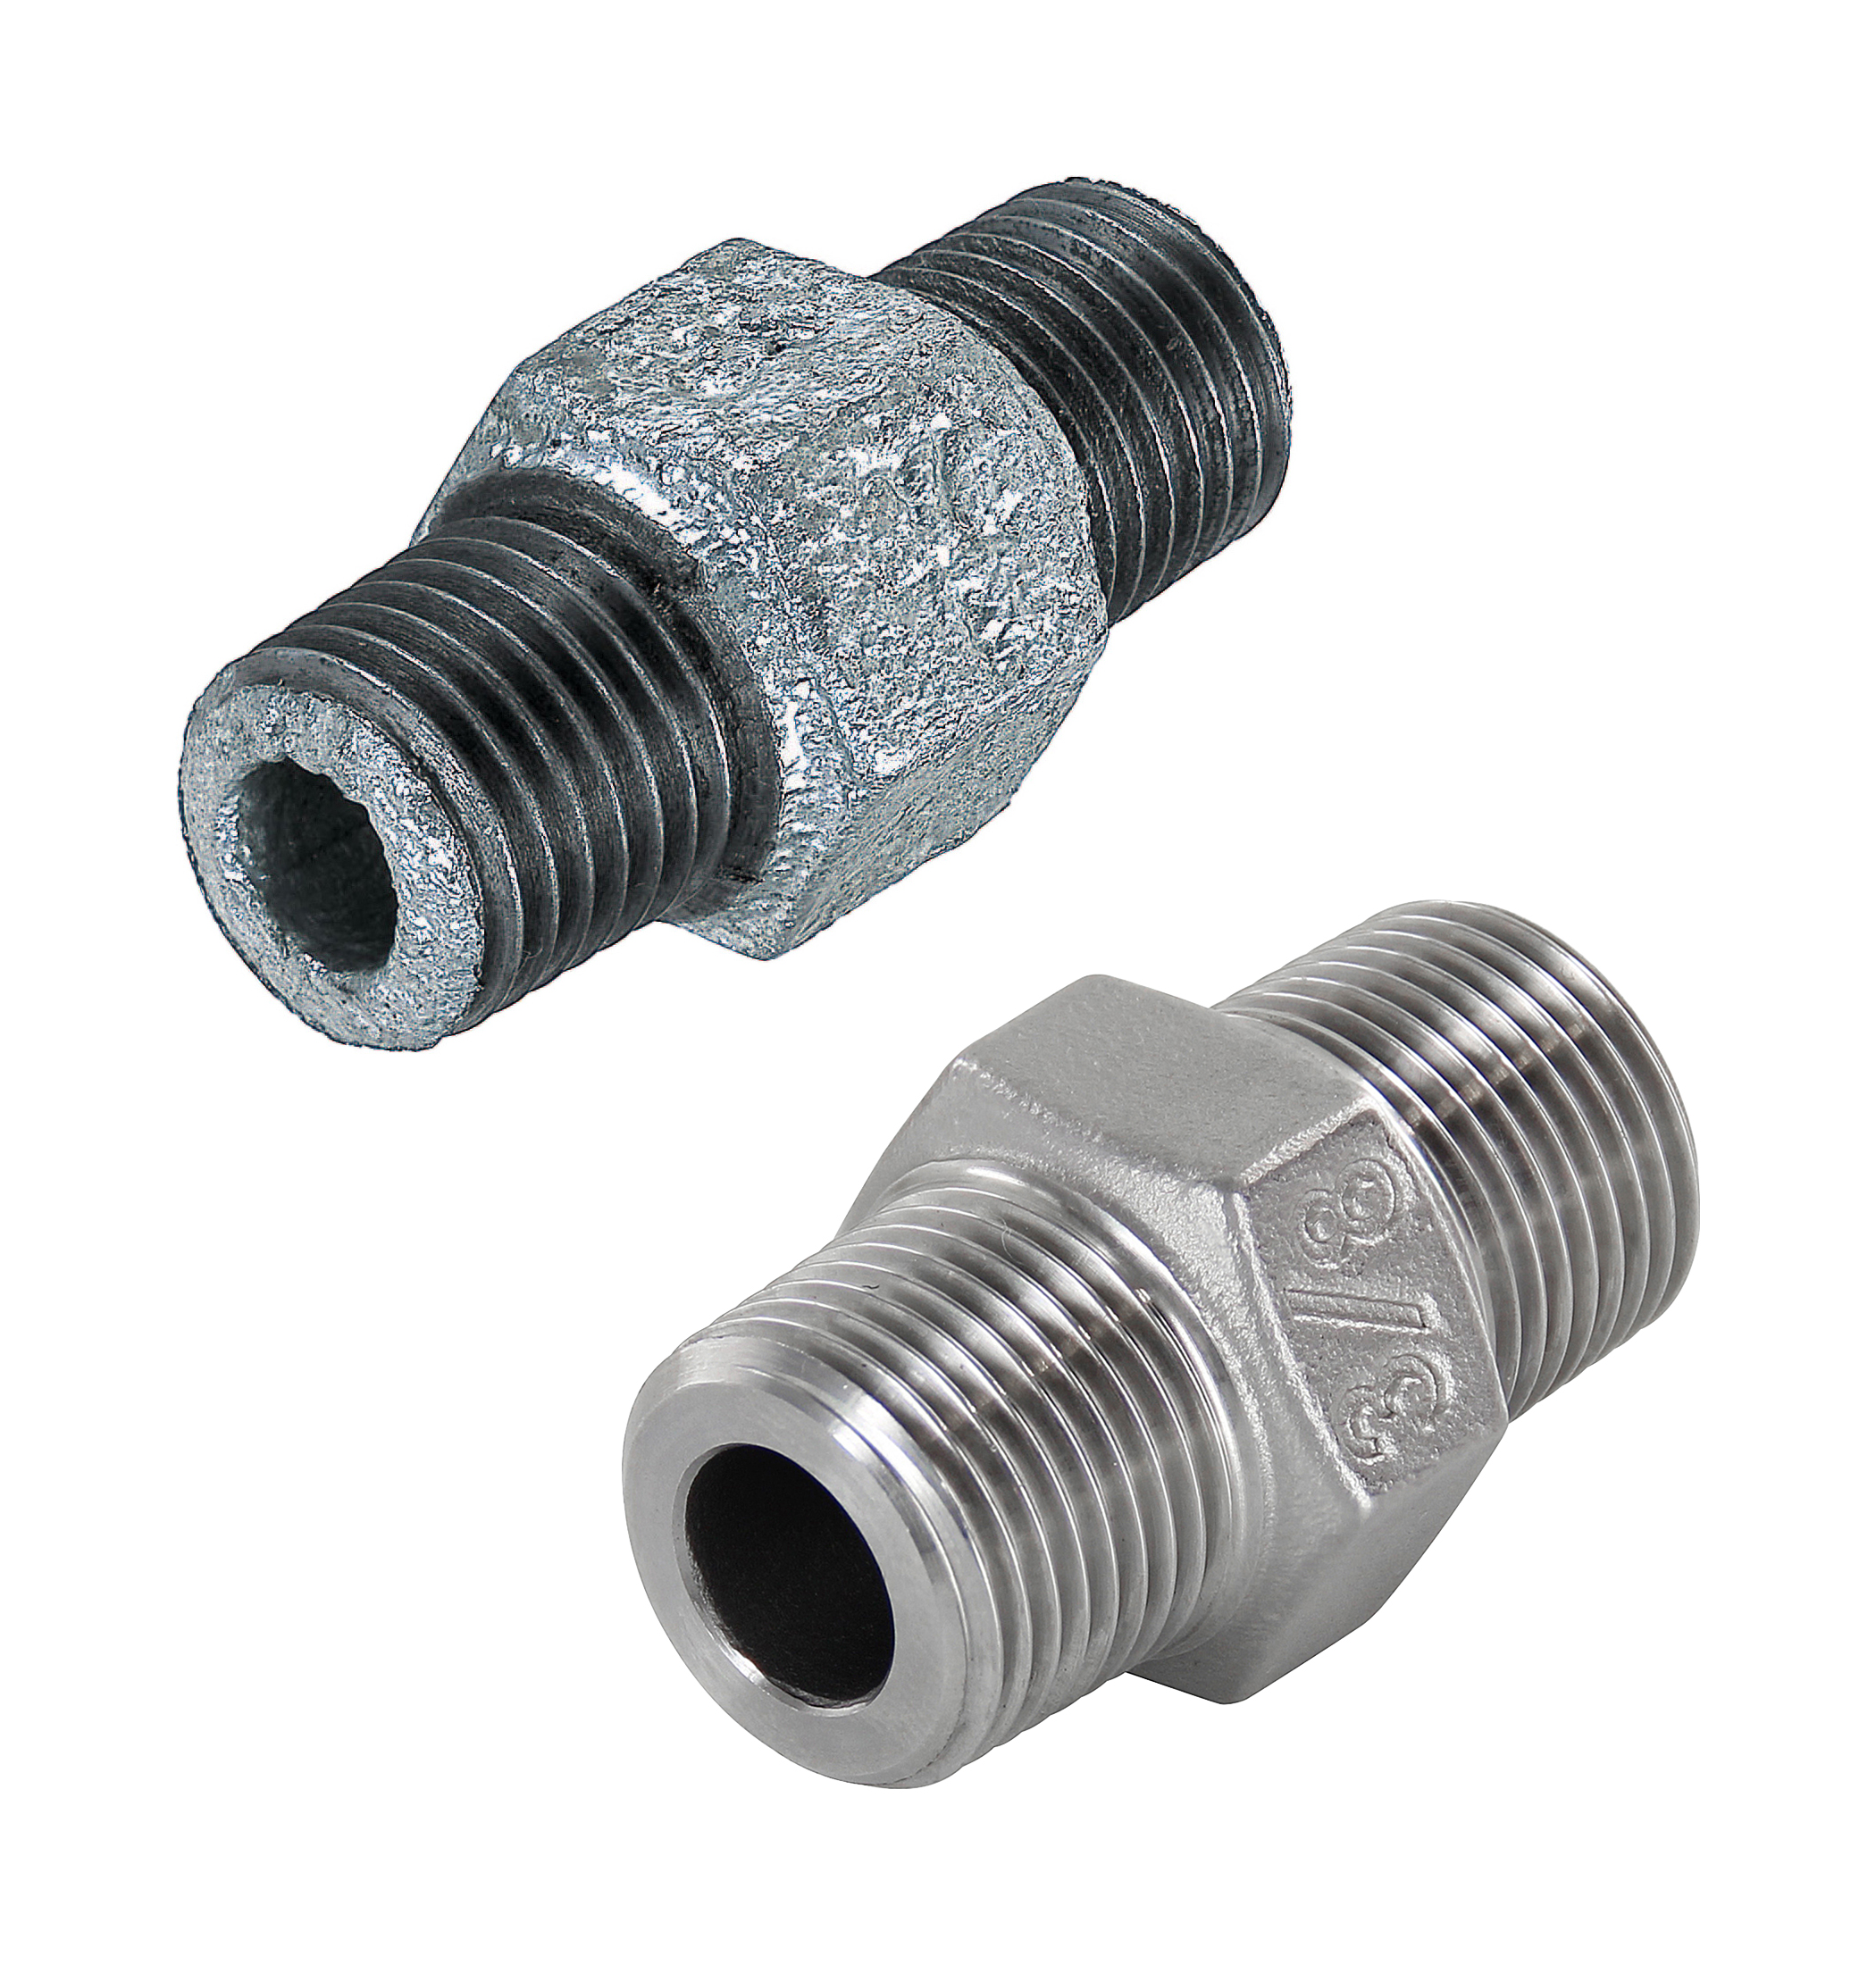 Pipe Fitting - Hex Union, Male, Threaded, Low Pressure SUTNR25A